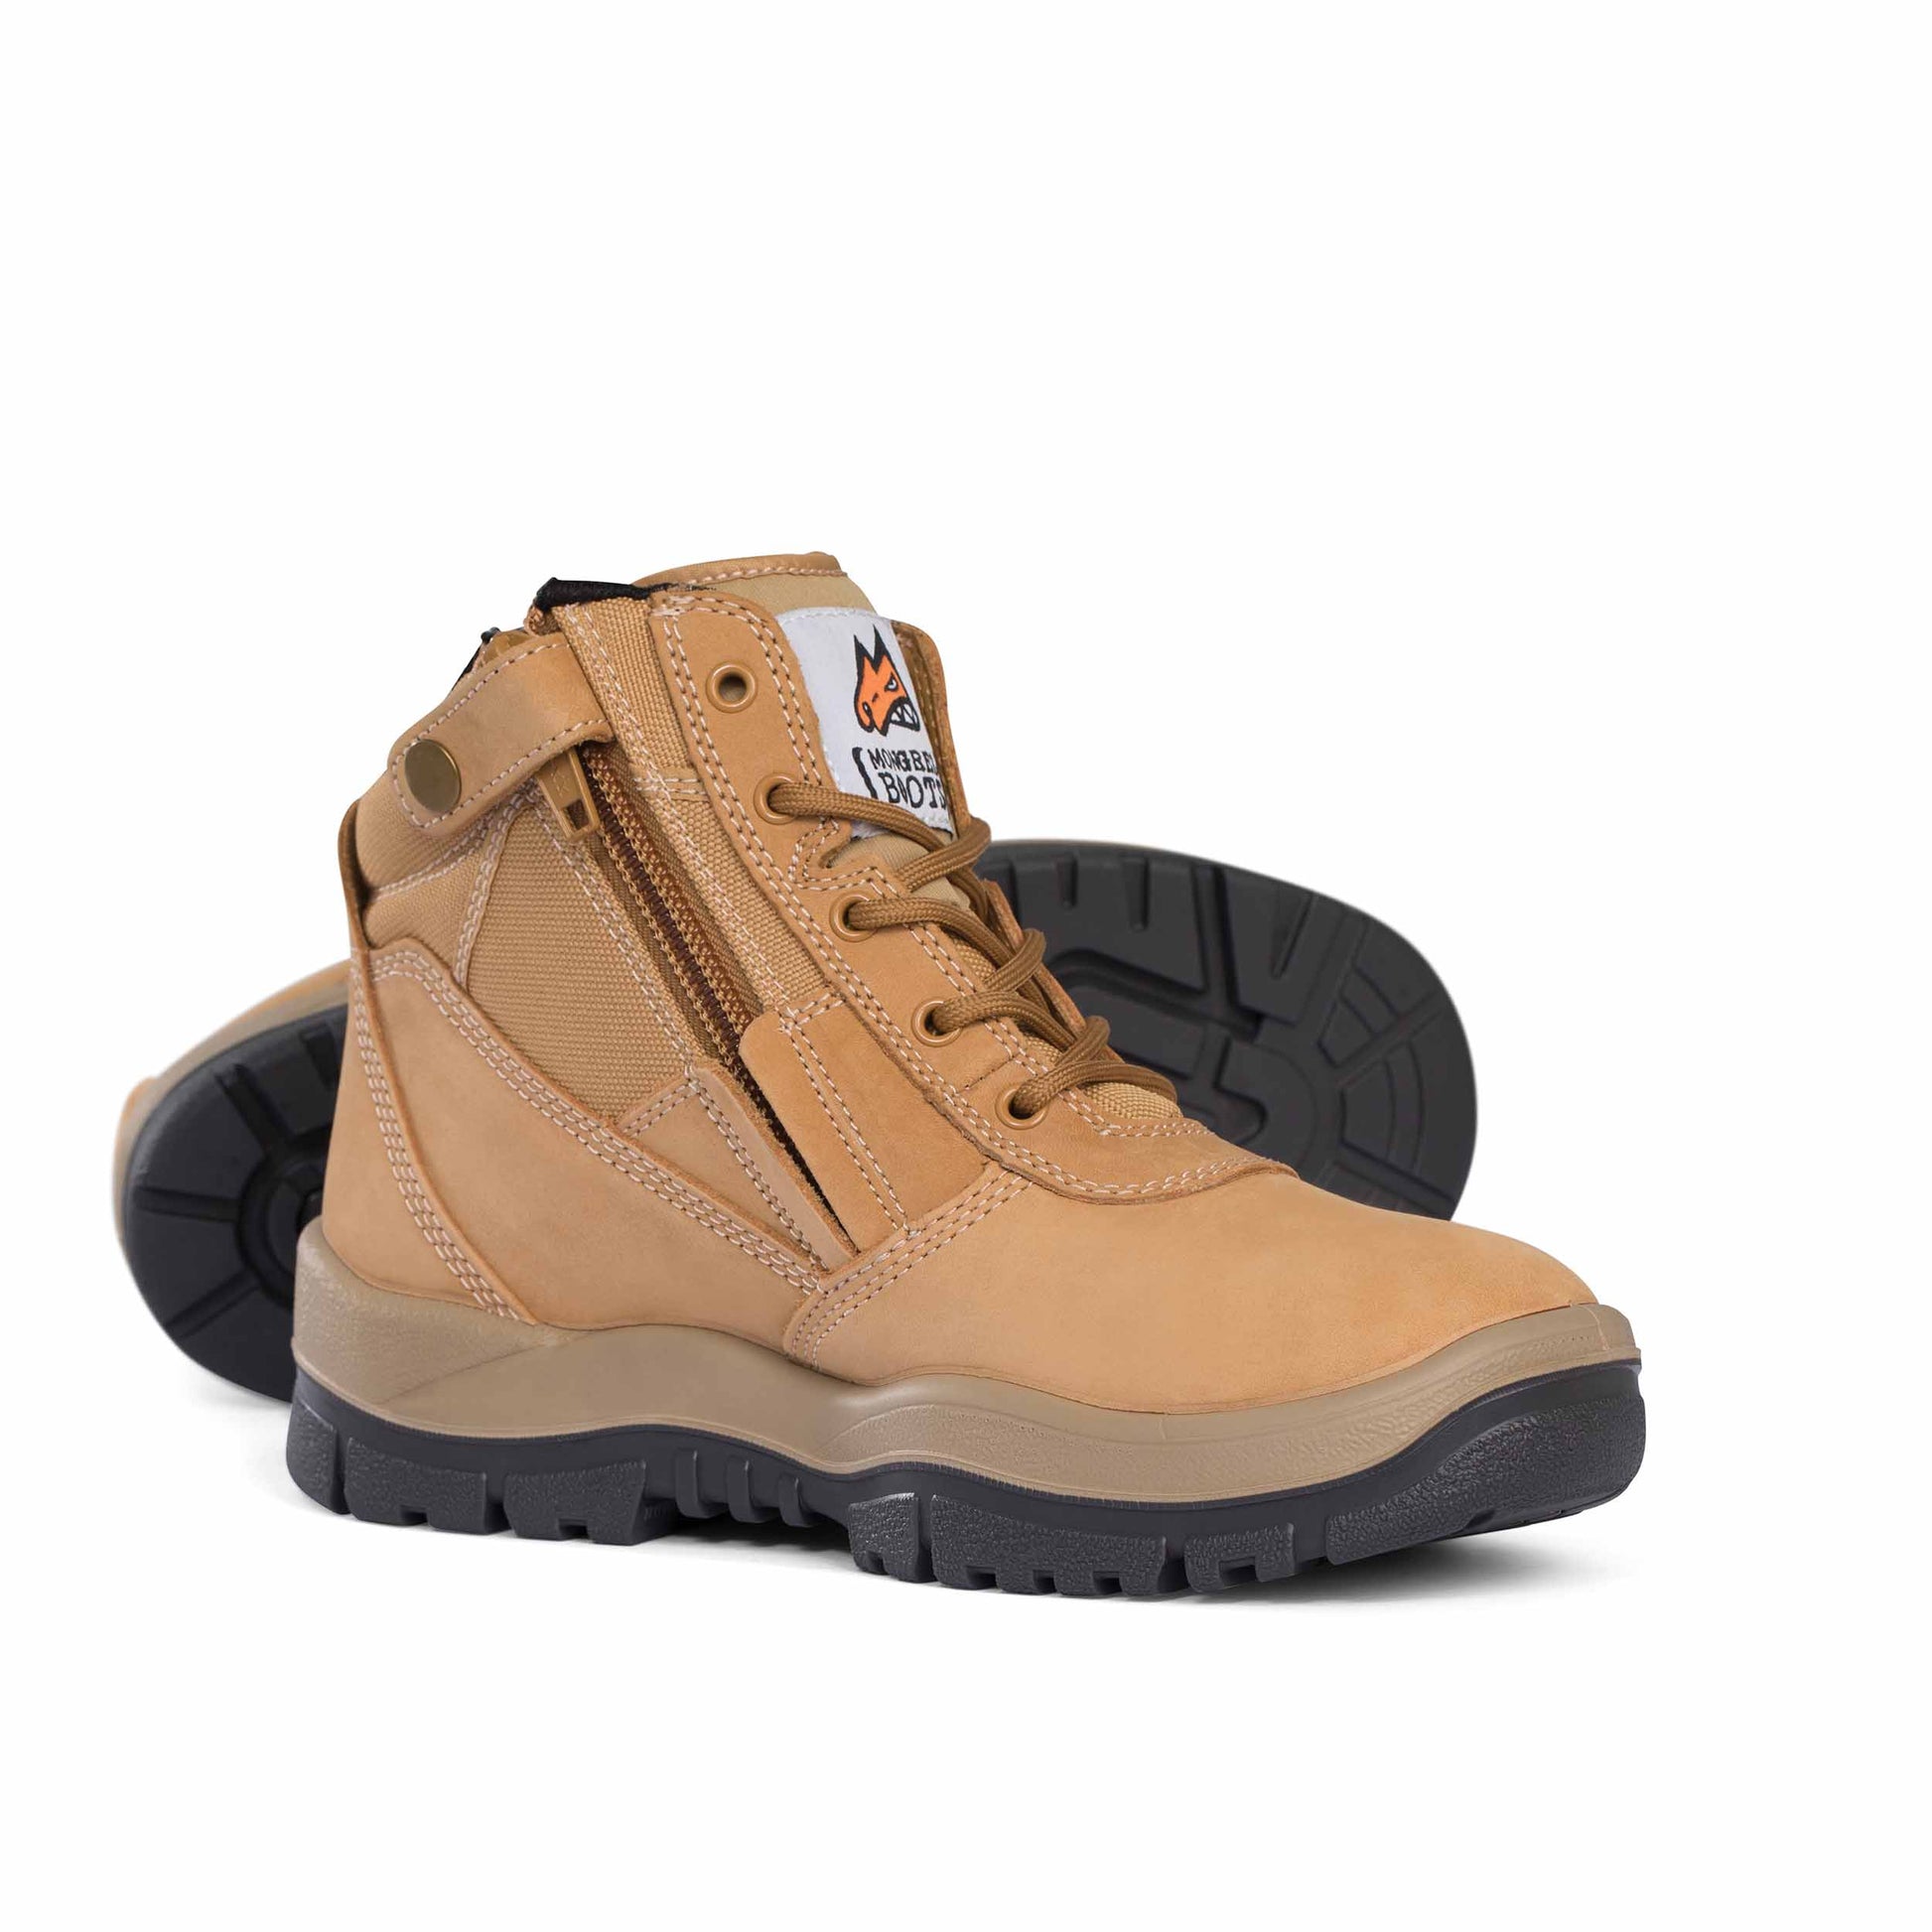 Wheat Zip Safety Boots - made by Mongrel